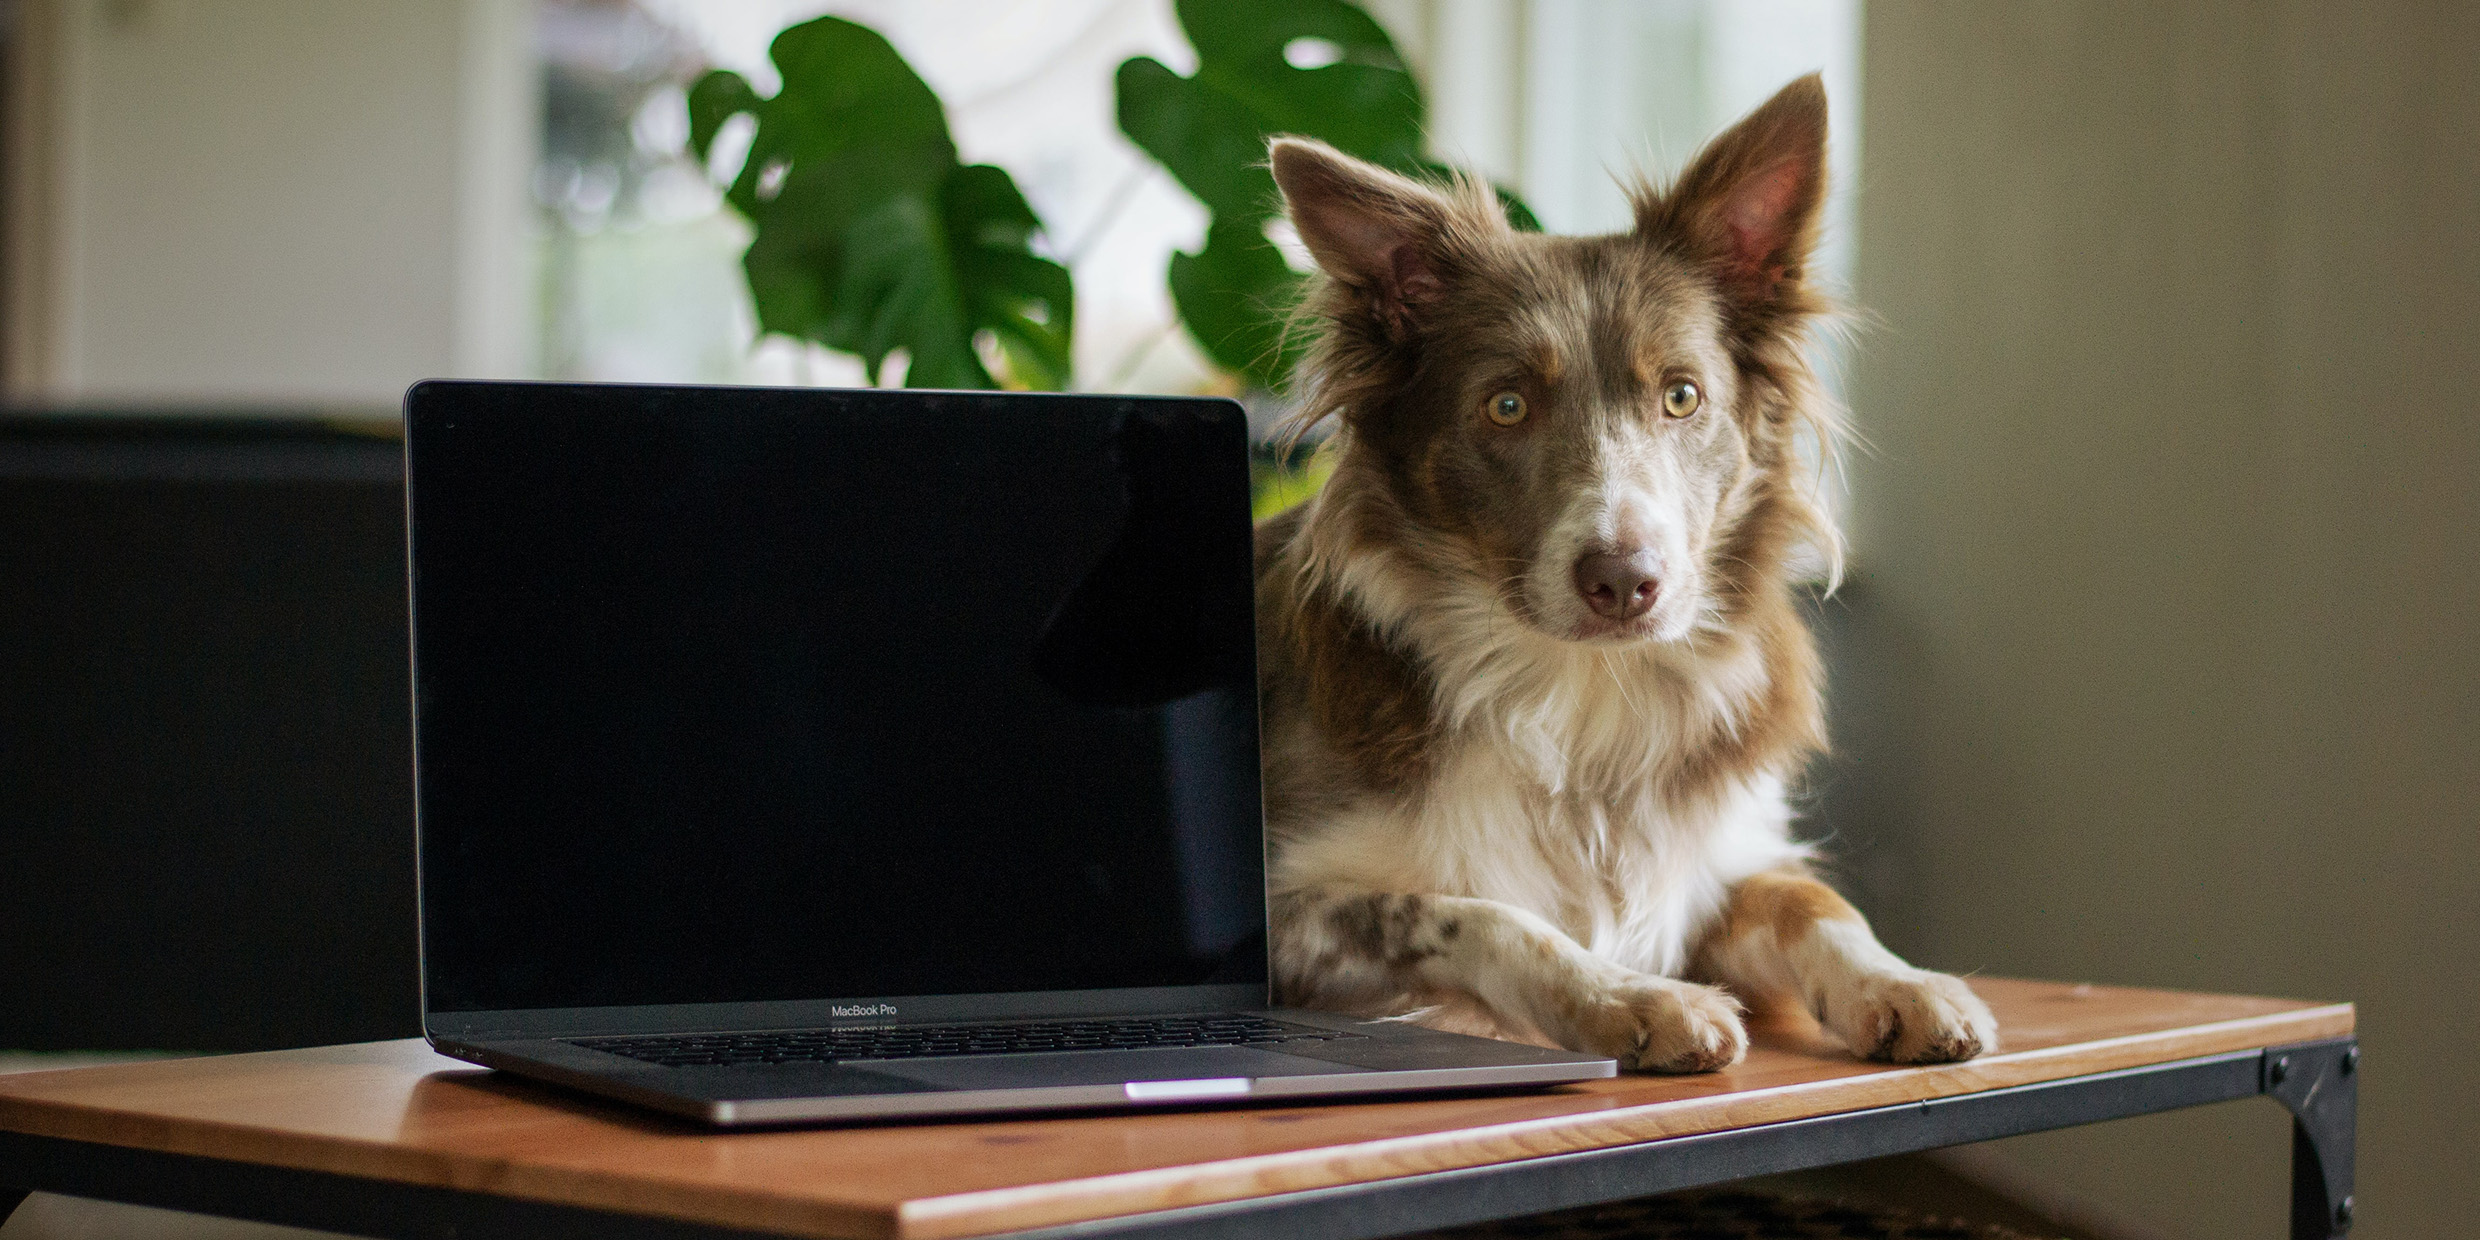 Image of a dog laying down behind an open laptop computer